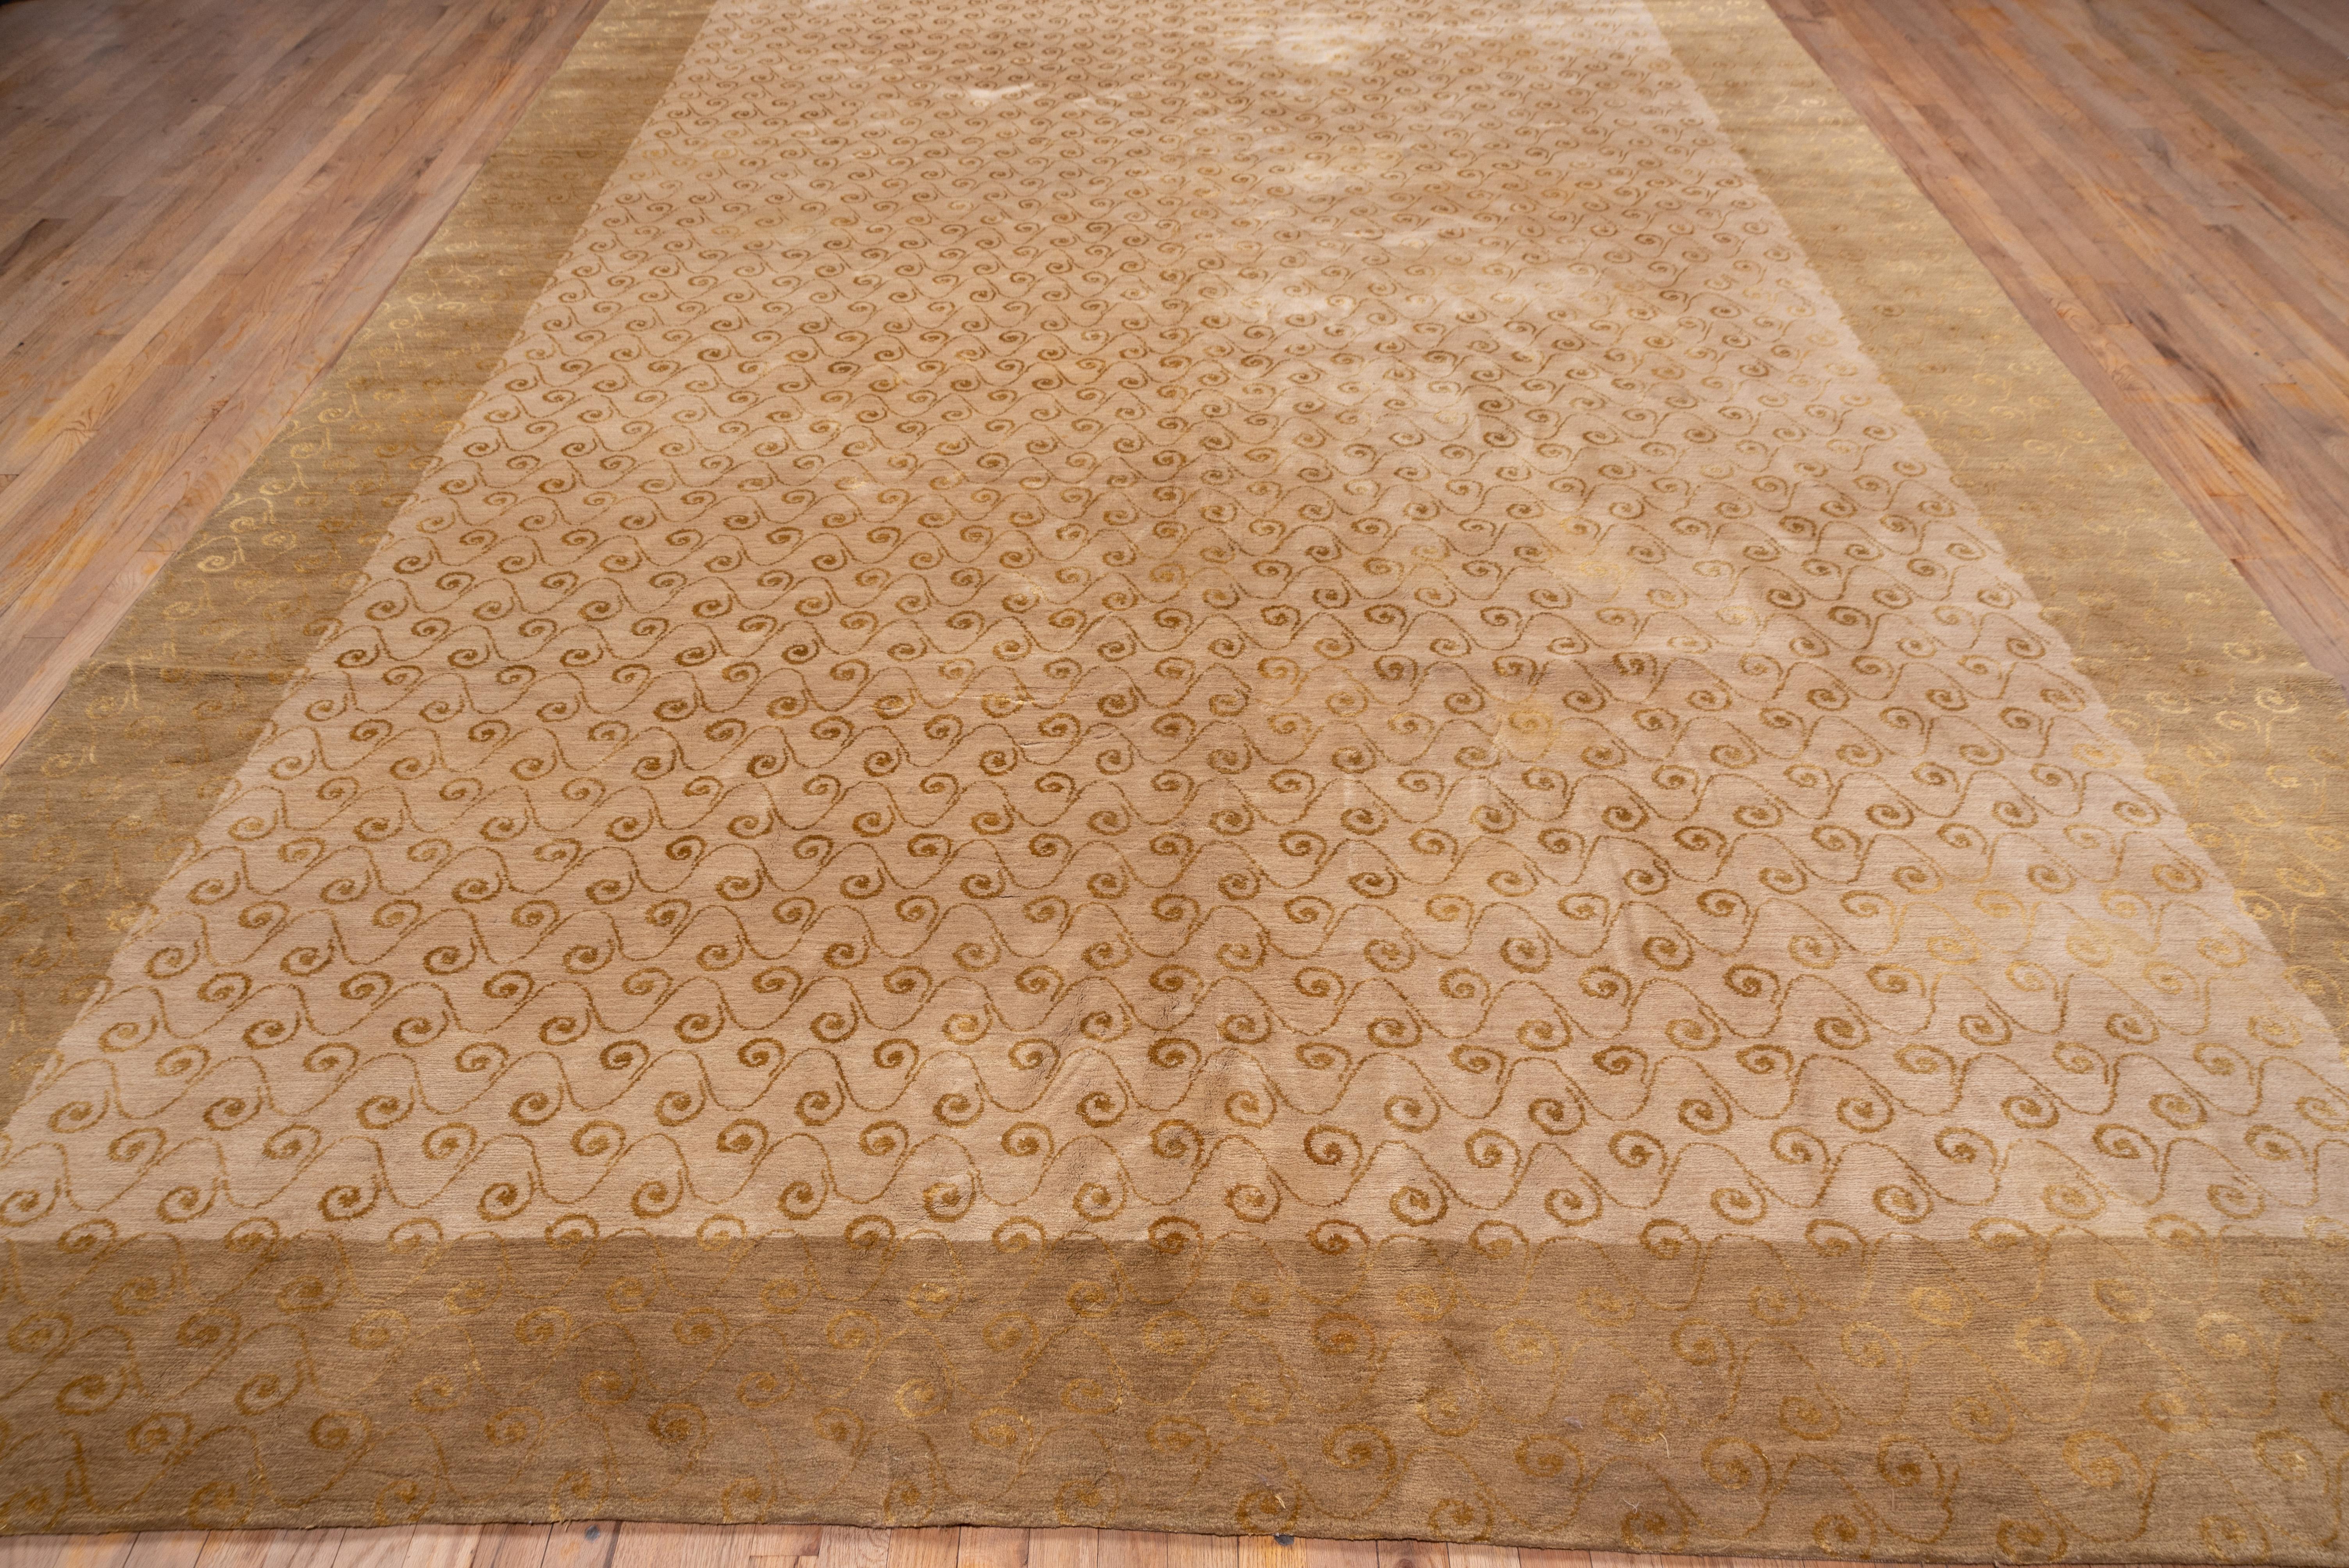 Hand-Knotted Modern Tibetan Carpet with Gold Border, Gold Snail Shell Spiral Allover Field